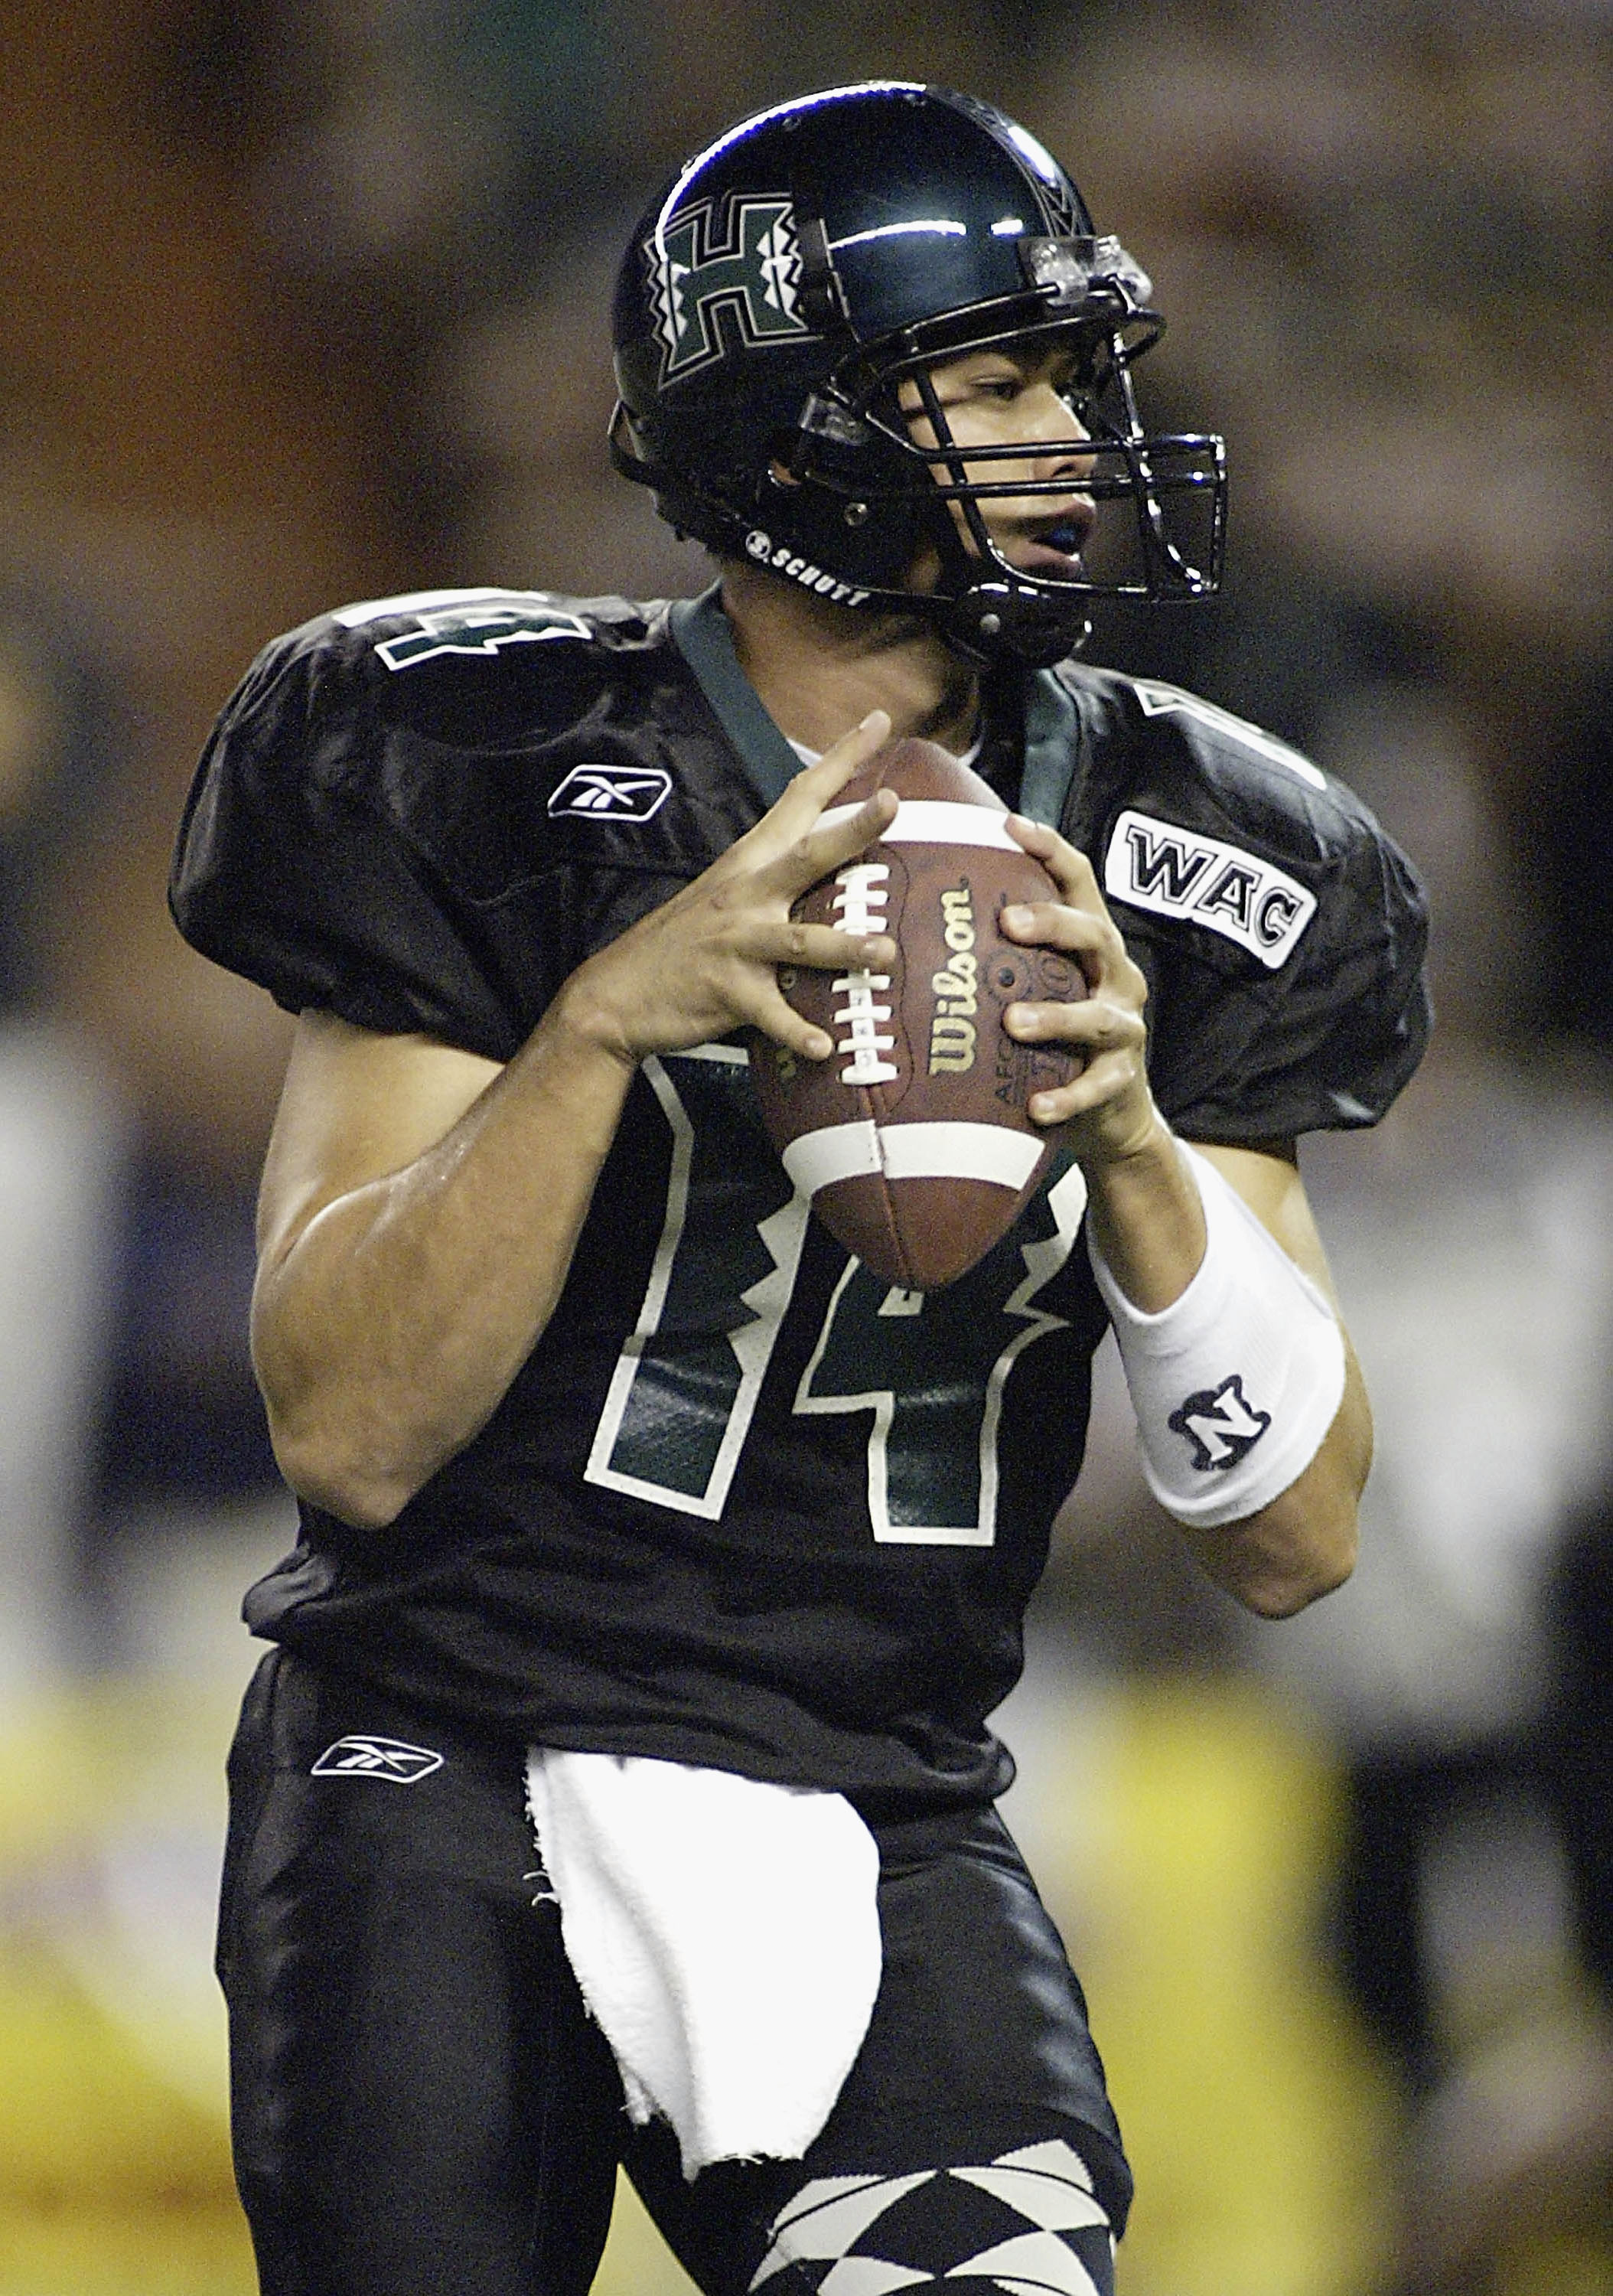 HONOLULU, HI - NOVEMBER 6:  University of Hawaii quarterback Timmy Chang looks to pass during the game between University of Hawaii and Louisiana Tech University at Aloha Stadium, November 6, 2004 in Honolulu, Hawaii. (Photo by Marco Garcia/Getty Images)